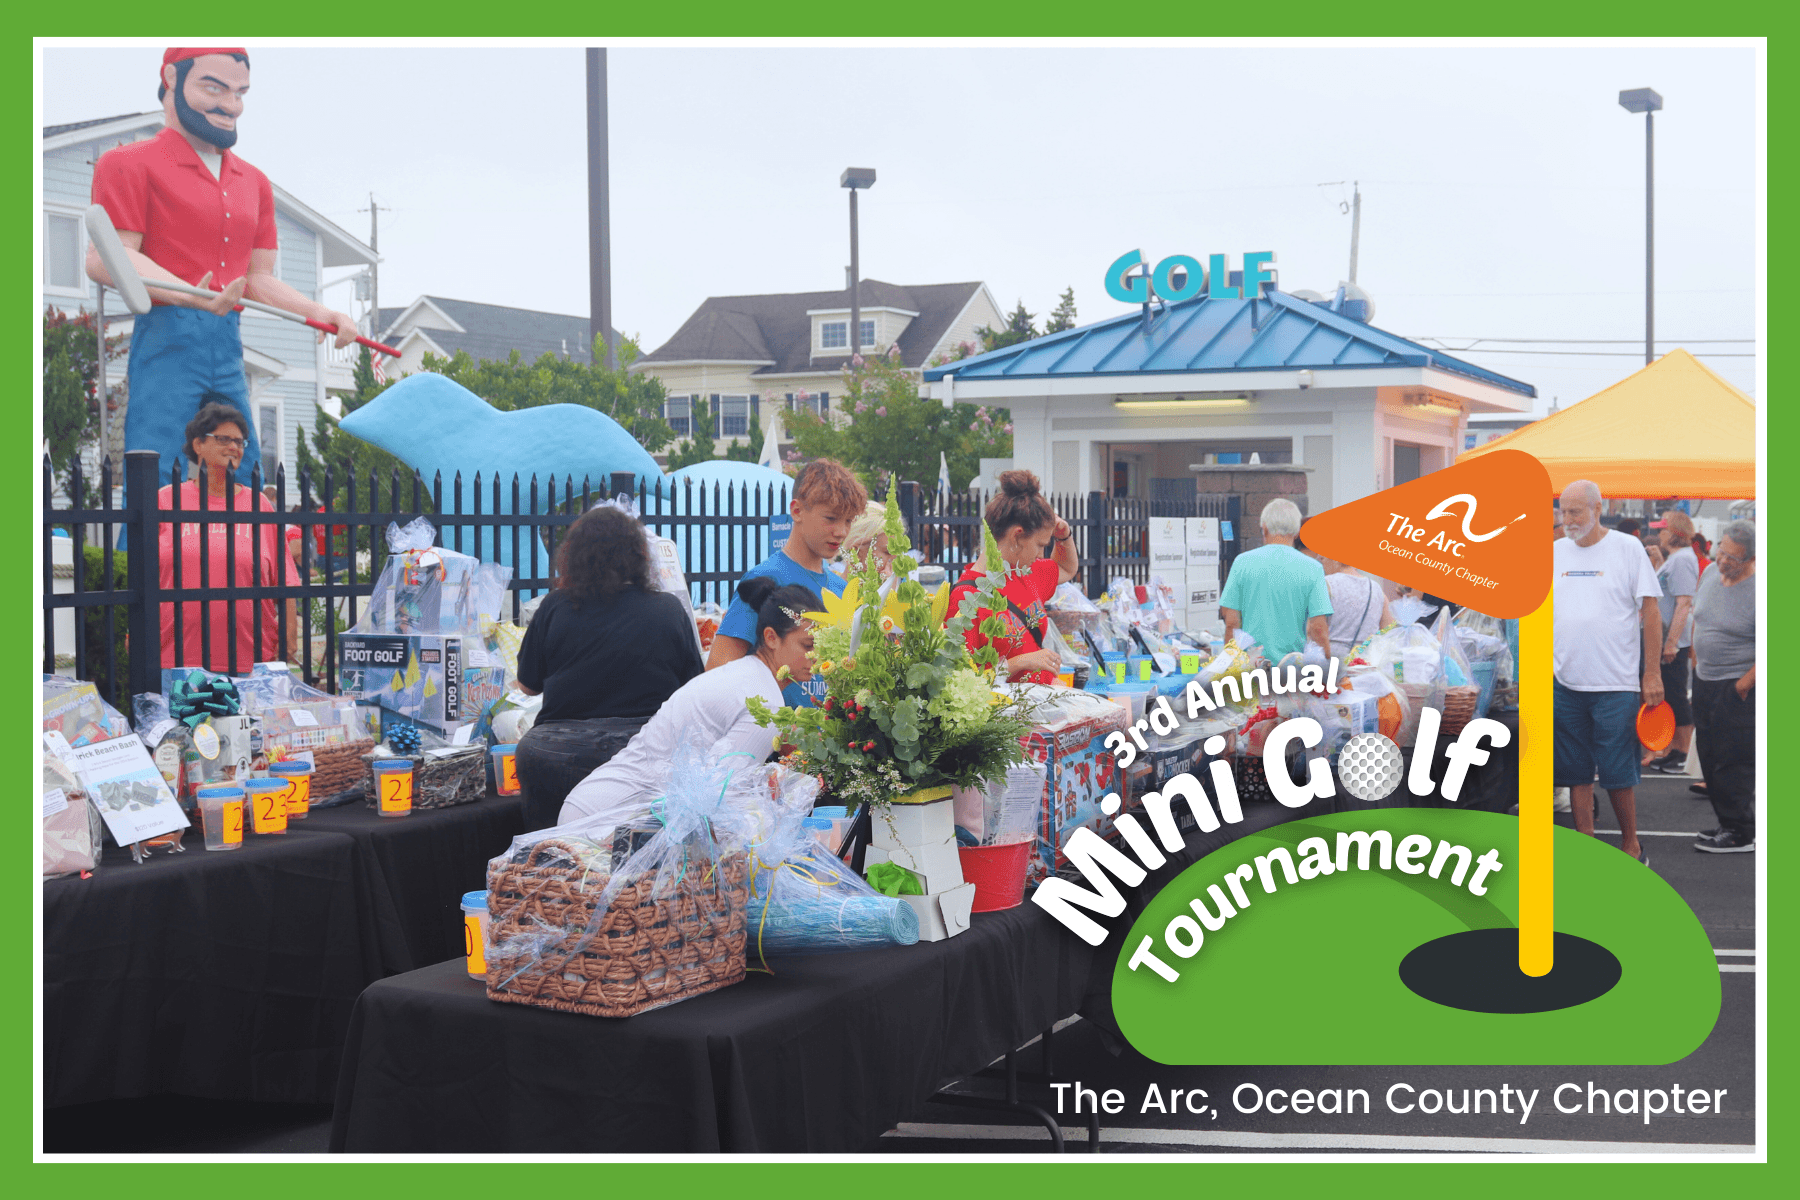 Mini golf event with gift basket auction